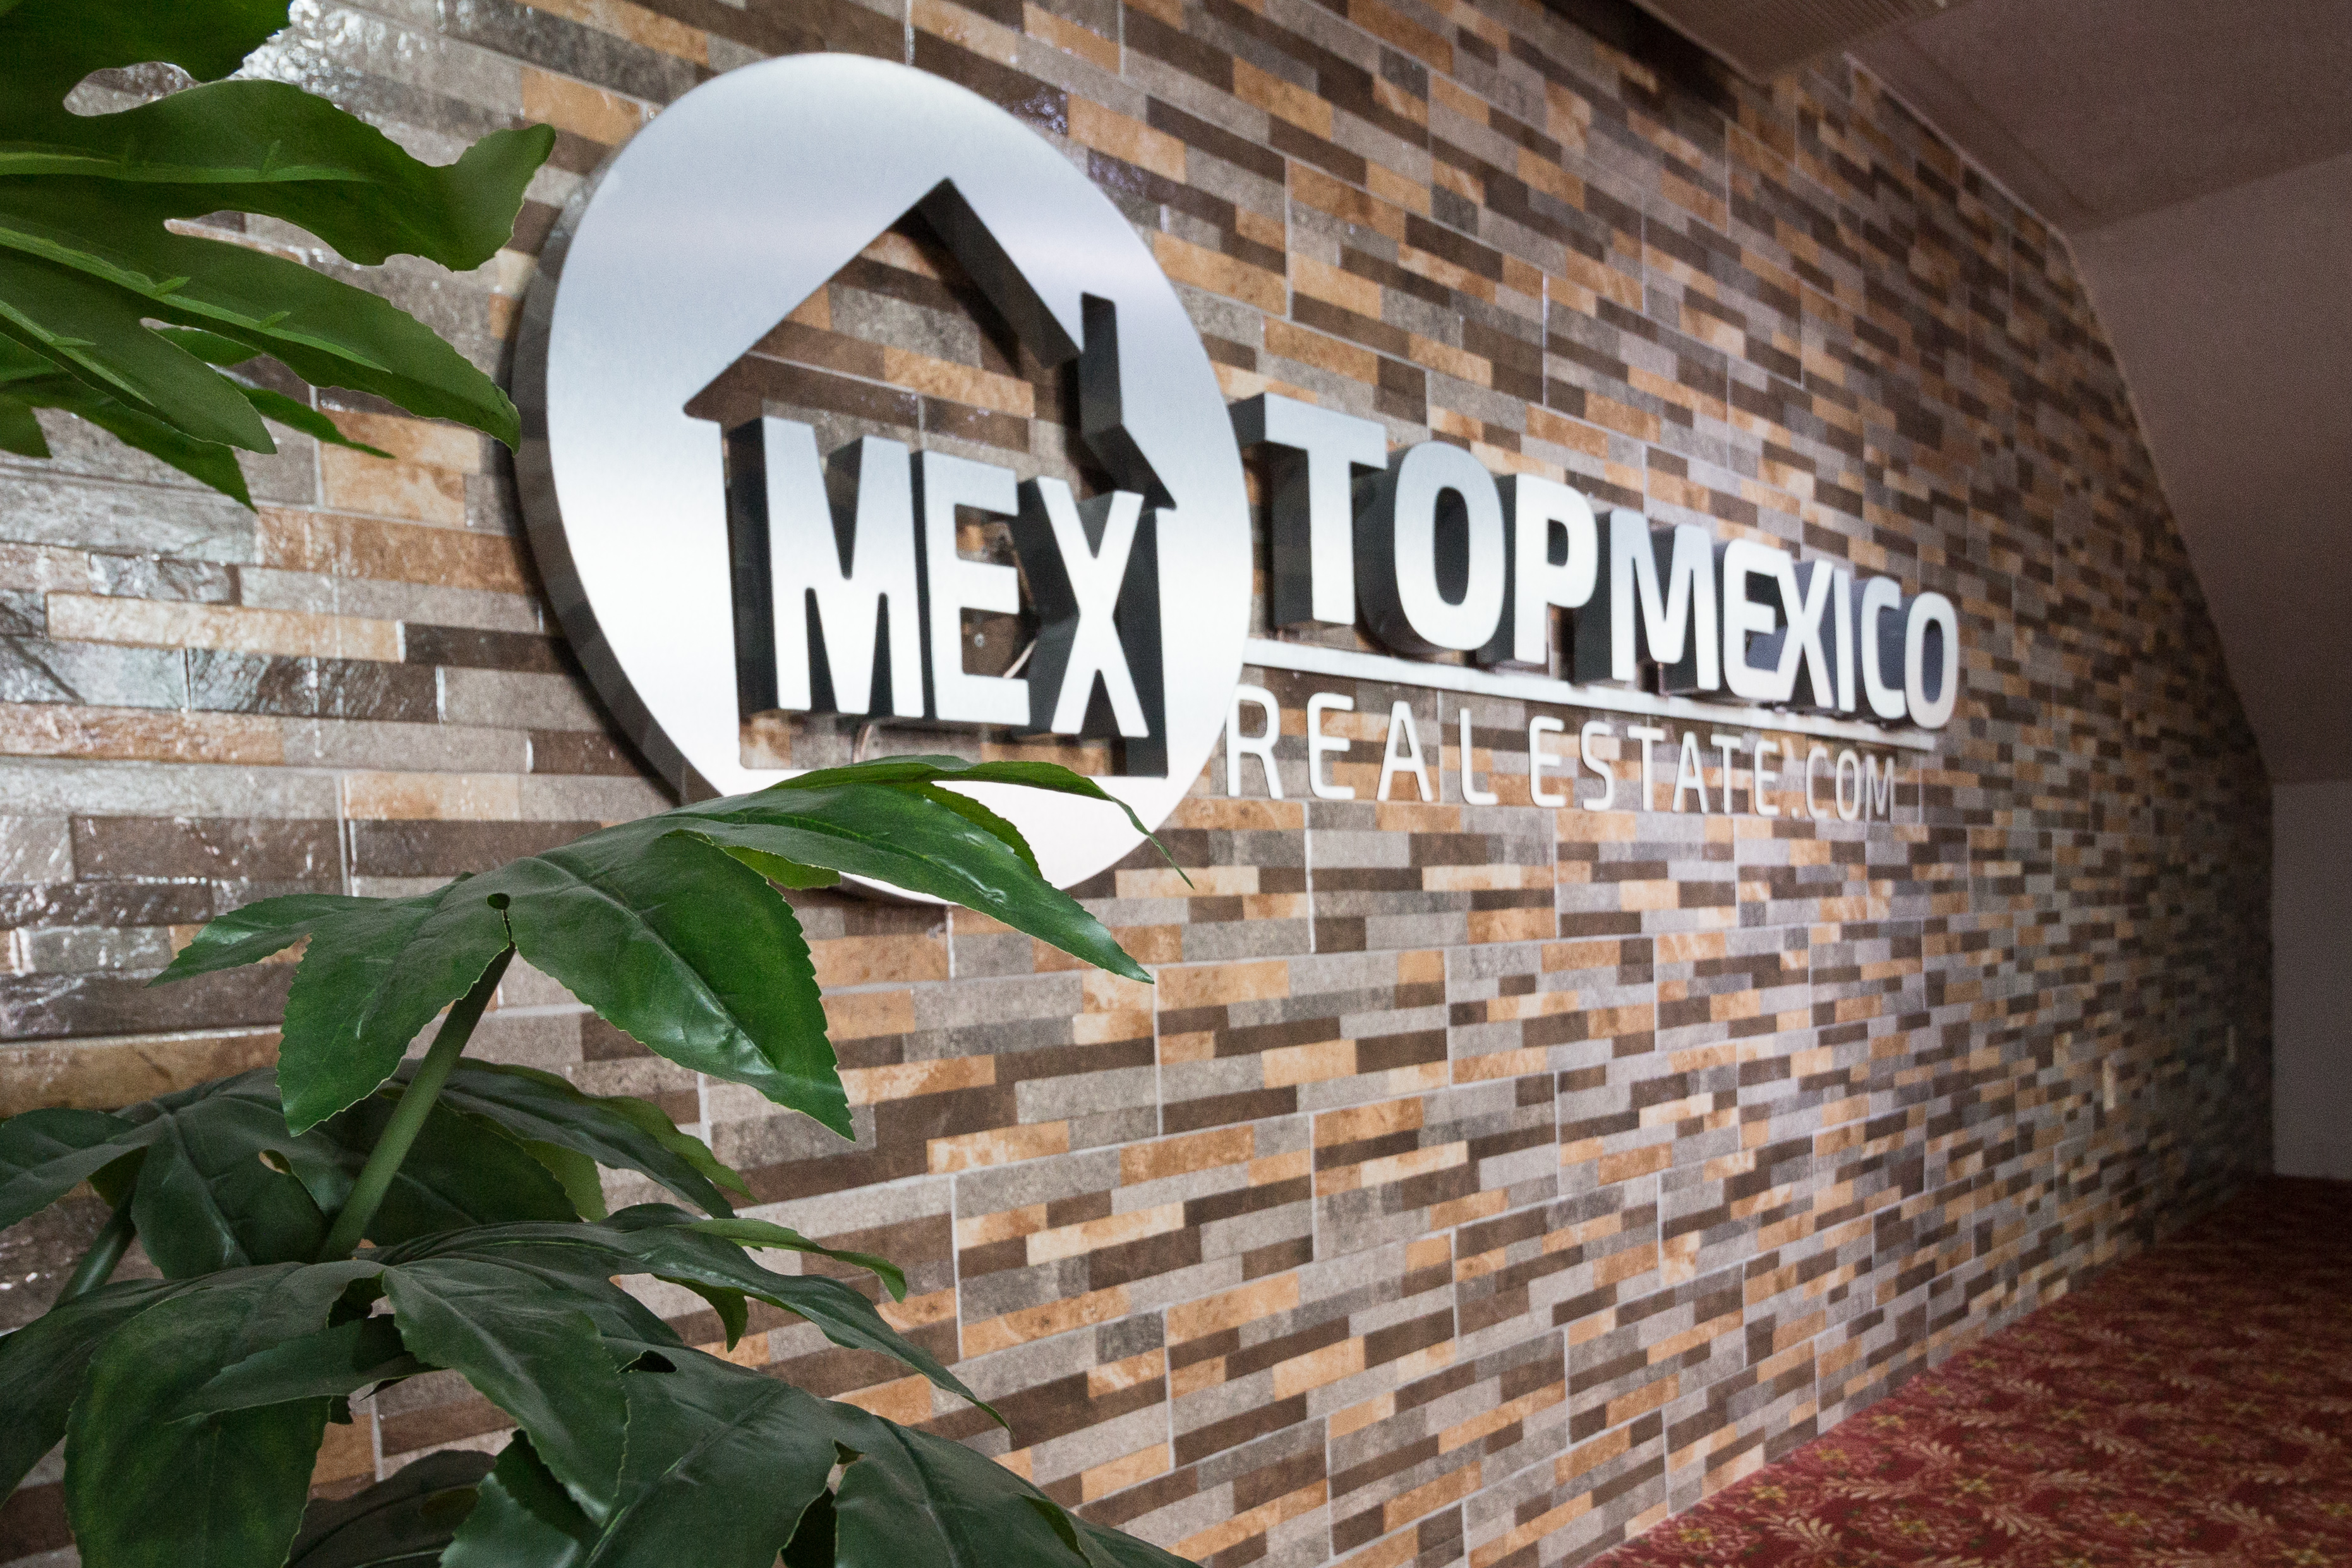 Top Mexico Real Estate Office